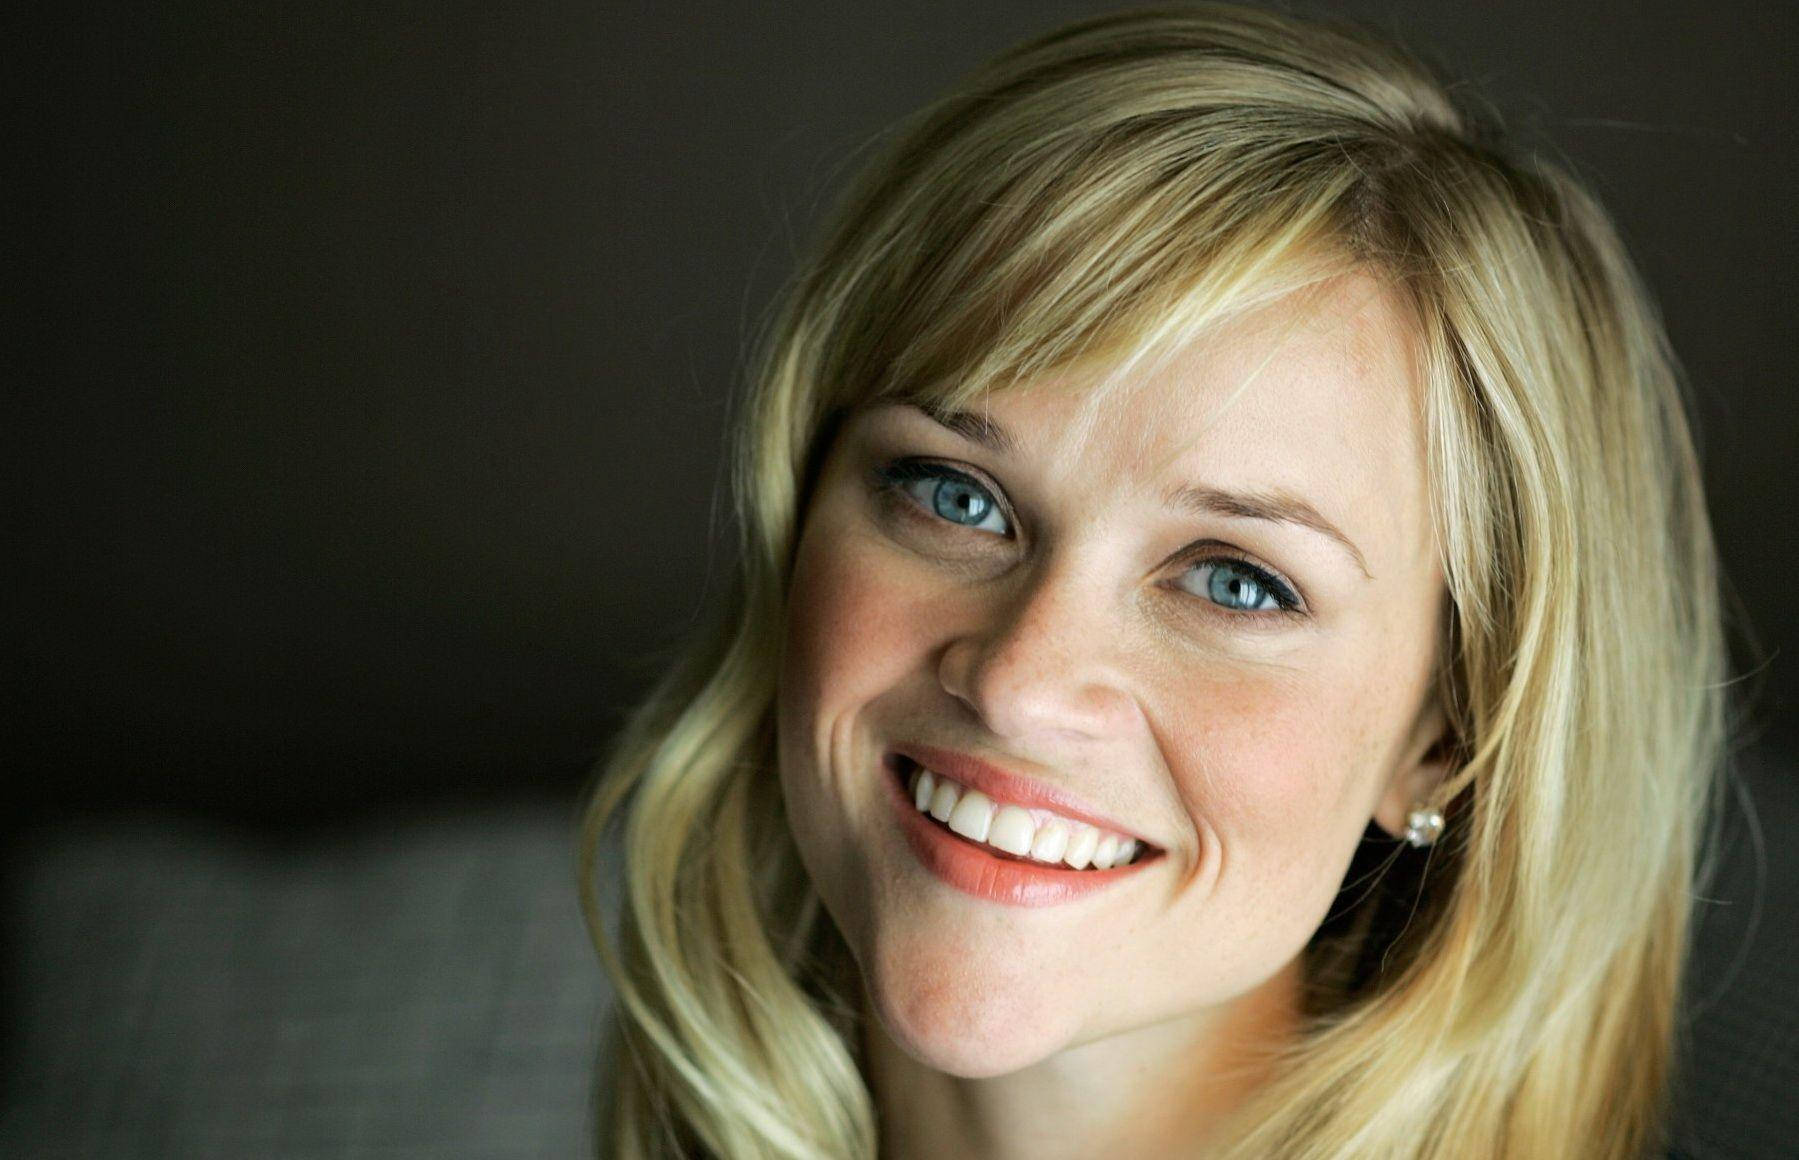 Reese Witherspoon Perfect Smile Wallpaper